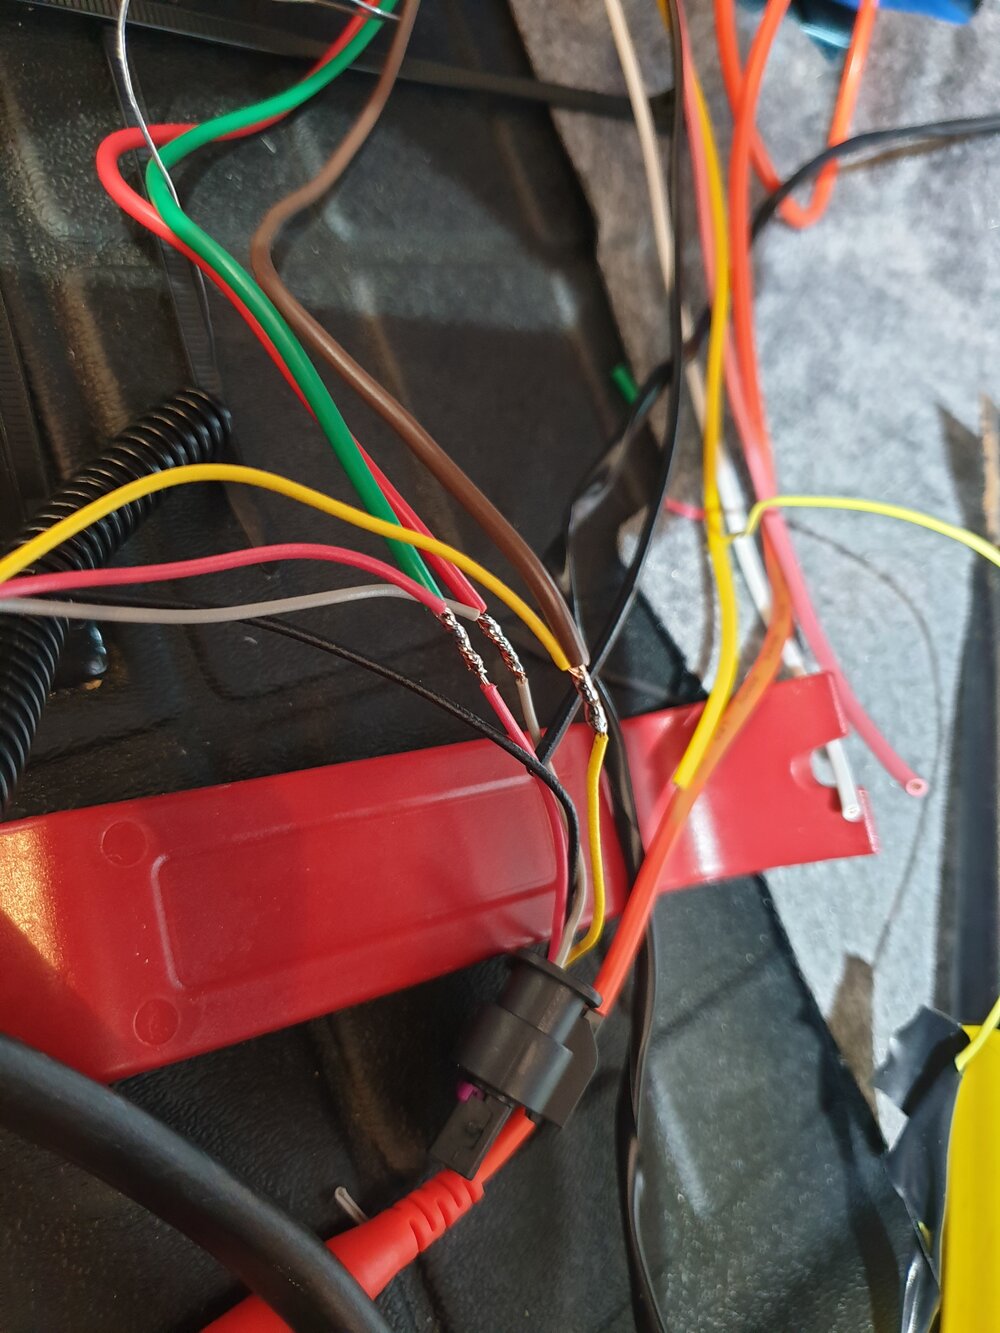 Splicing into the wiring